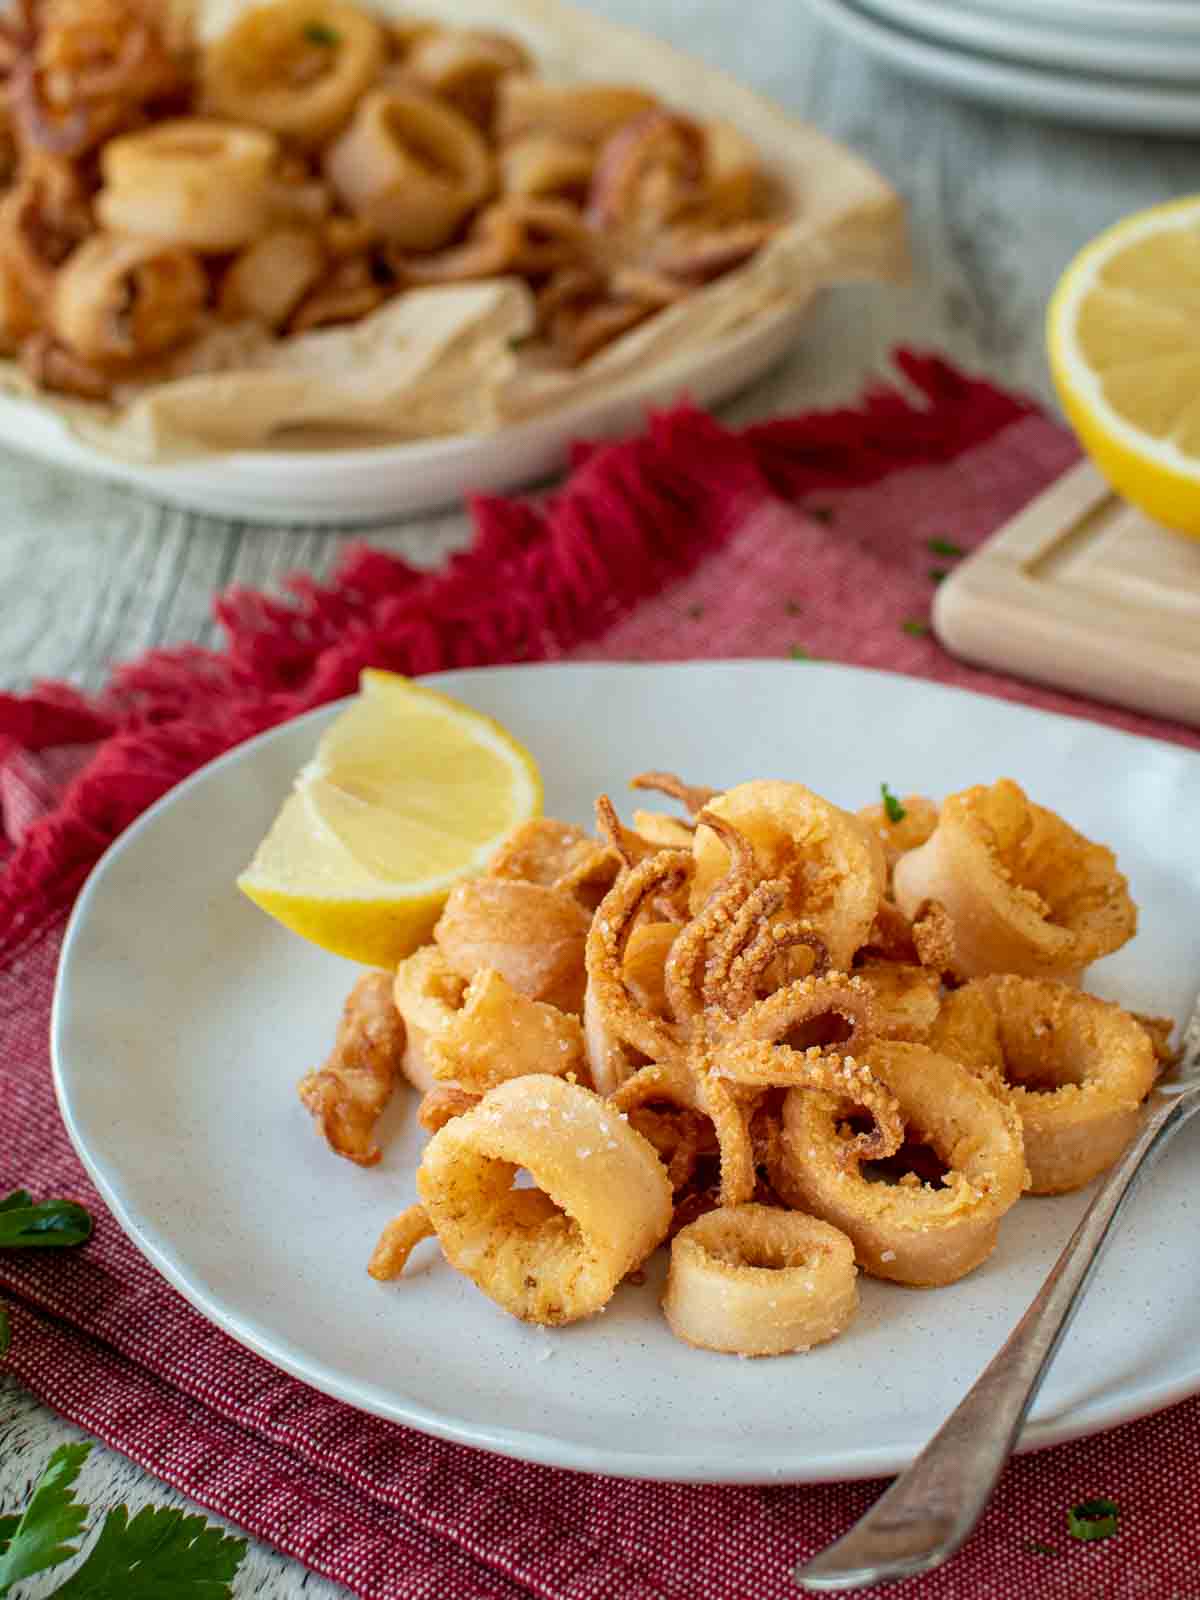 Calamari Fritti on a white plate with a wedge of lemon on the side and more calamari and lemon in the background.